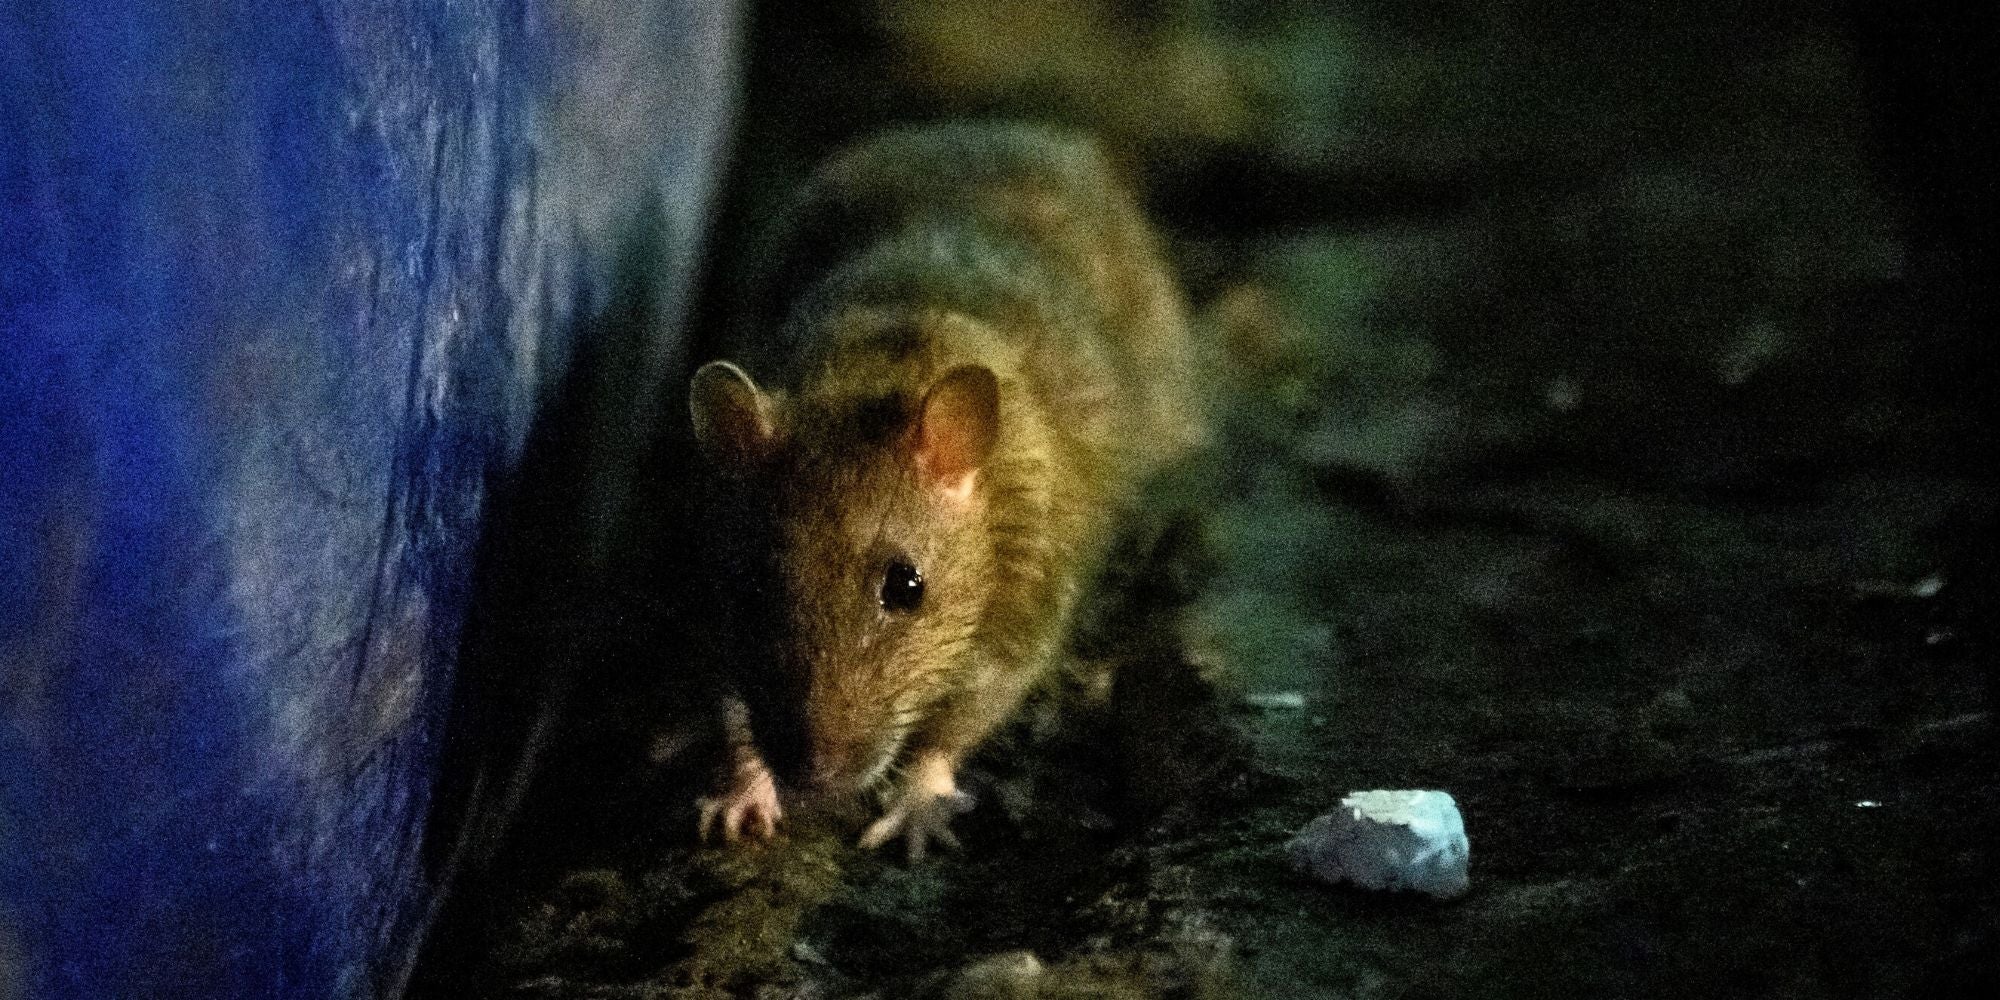 The virus is usually contracted by contact with food or household items which have been contaminated by the urine or faeces of infected rats